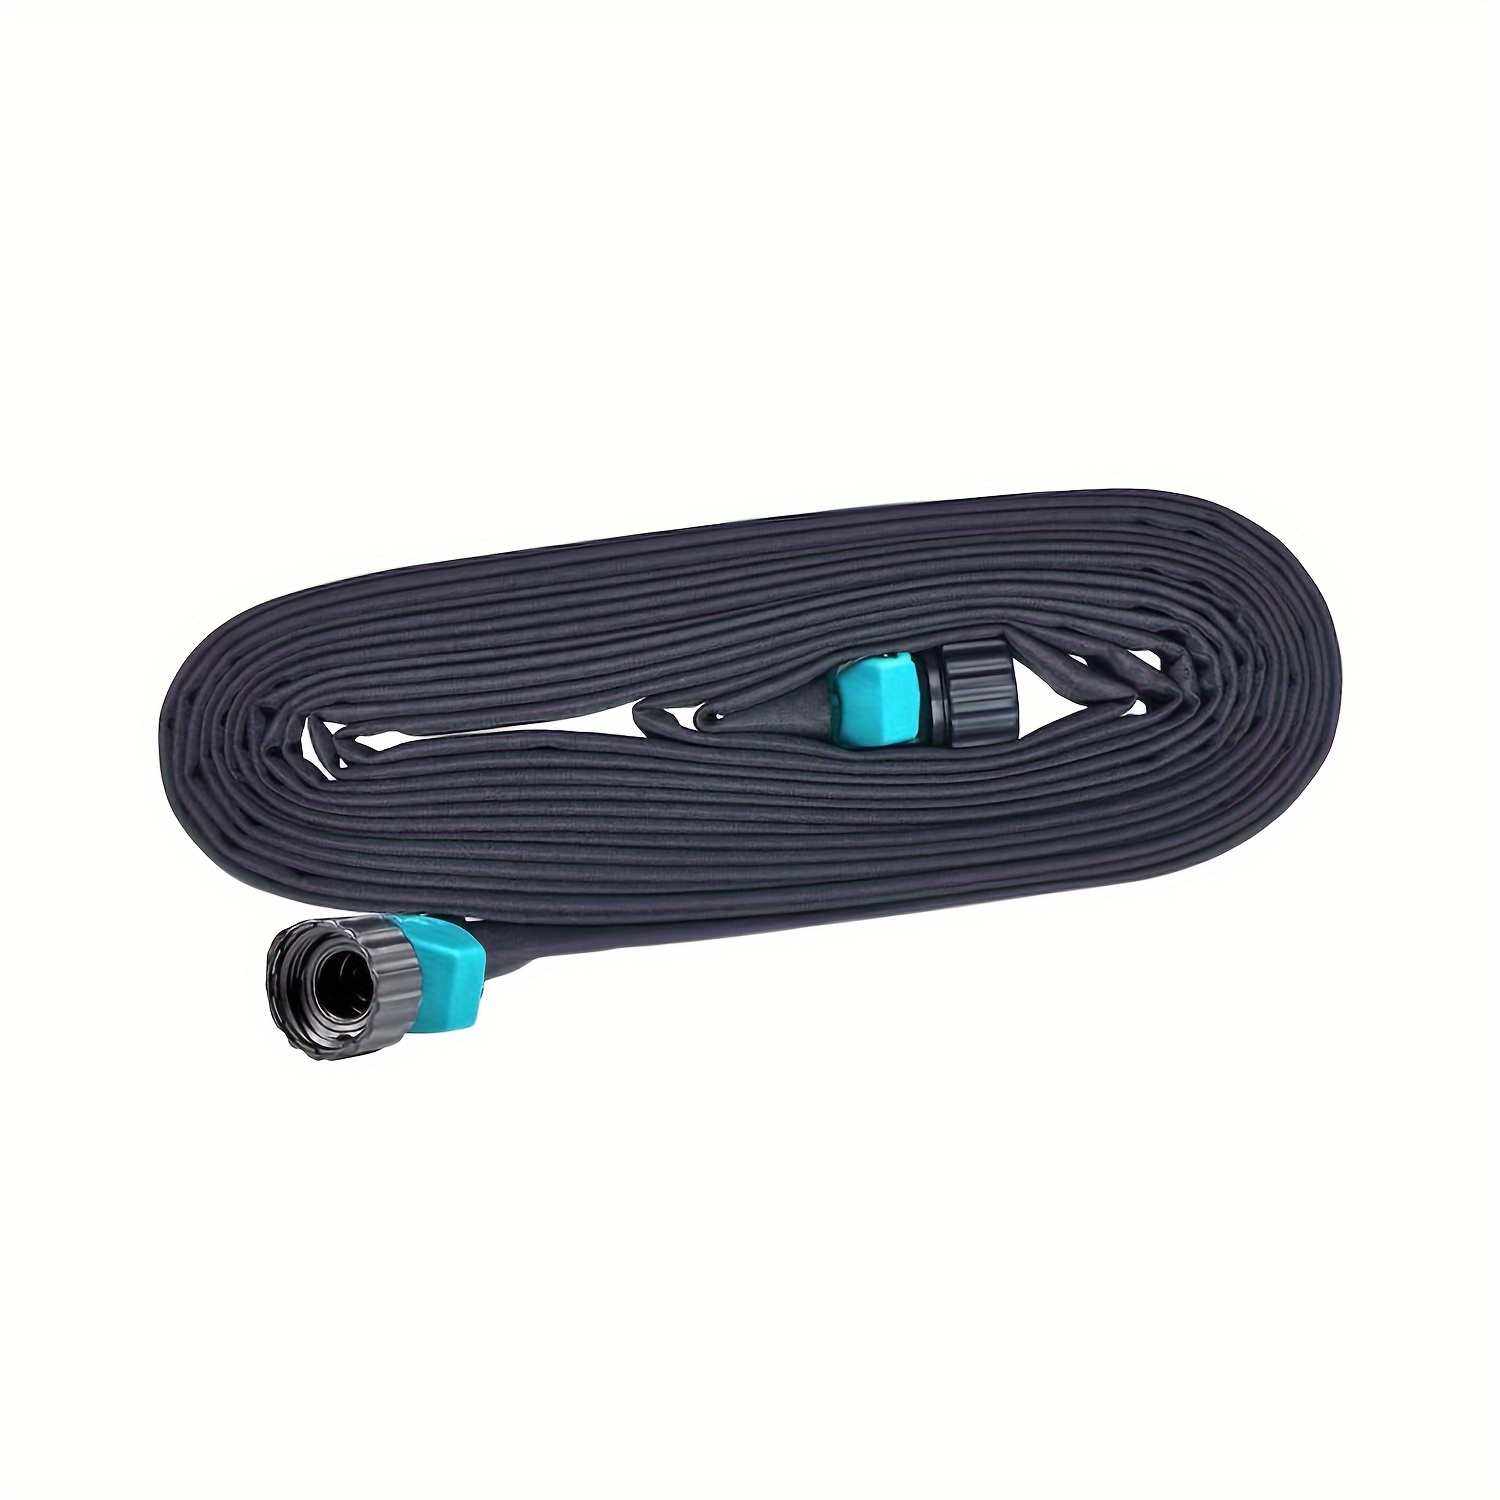 

50ft Heavy-duty Leakproof Garden Hose - 1/2" Connector, Water-saving Drip Irrigation System For Efficient Plant Watering